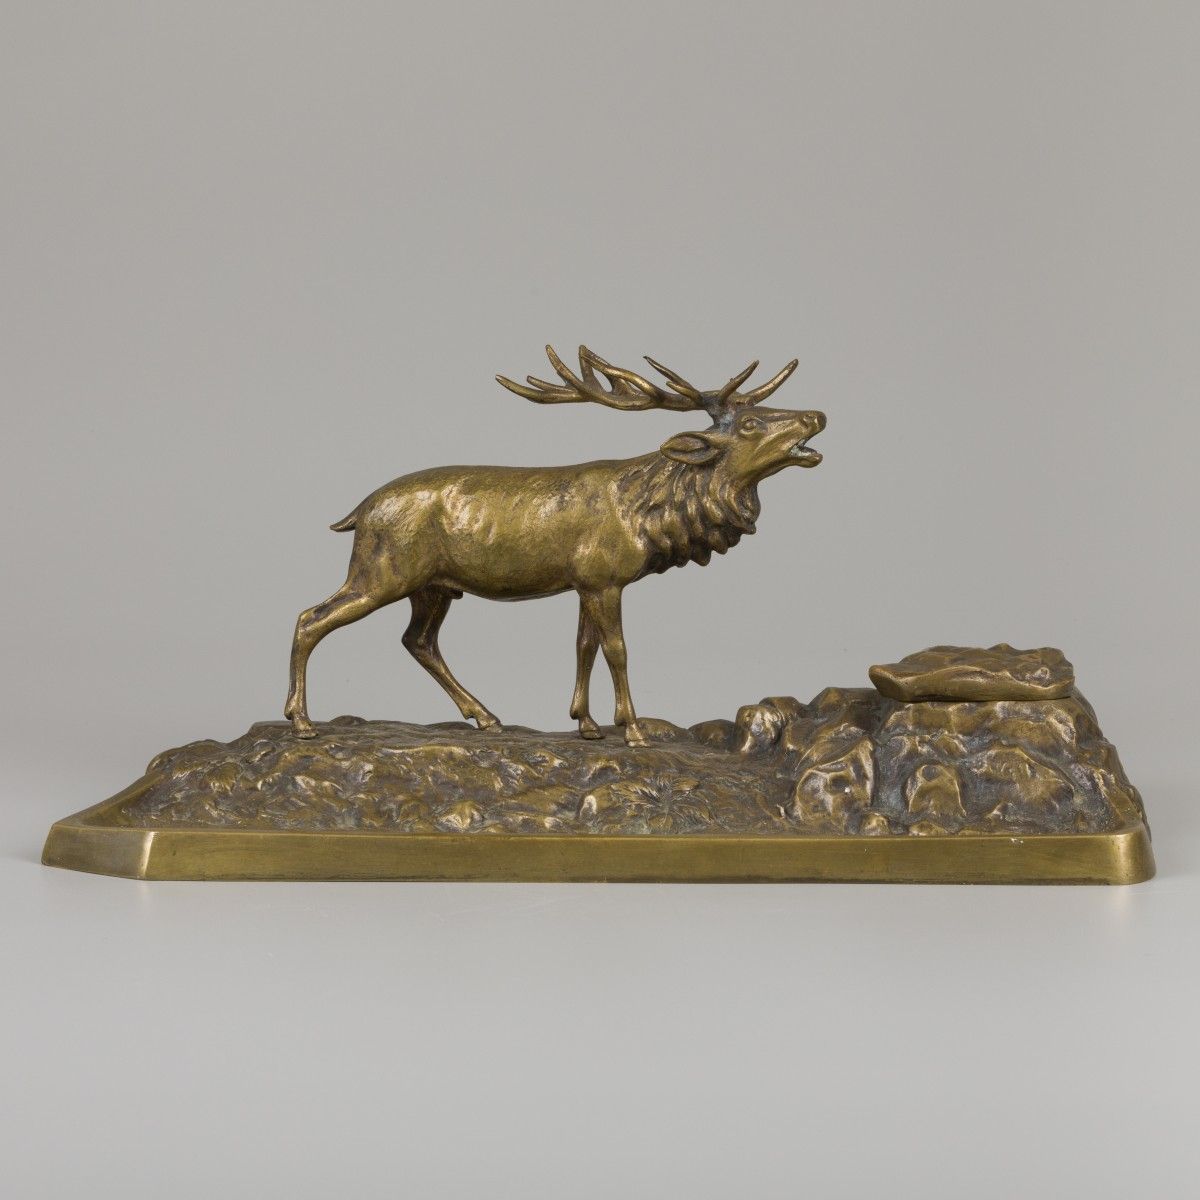 A bronze inkwell in the shape of a stag in a rocky landscape, ca. 1900. Dazu ein&hellip;